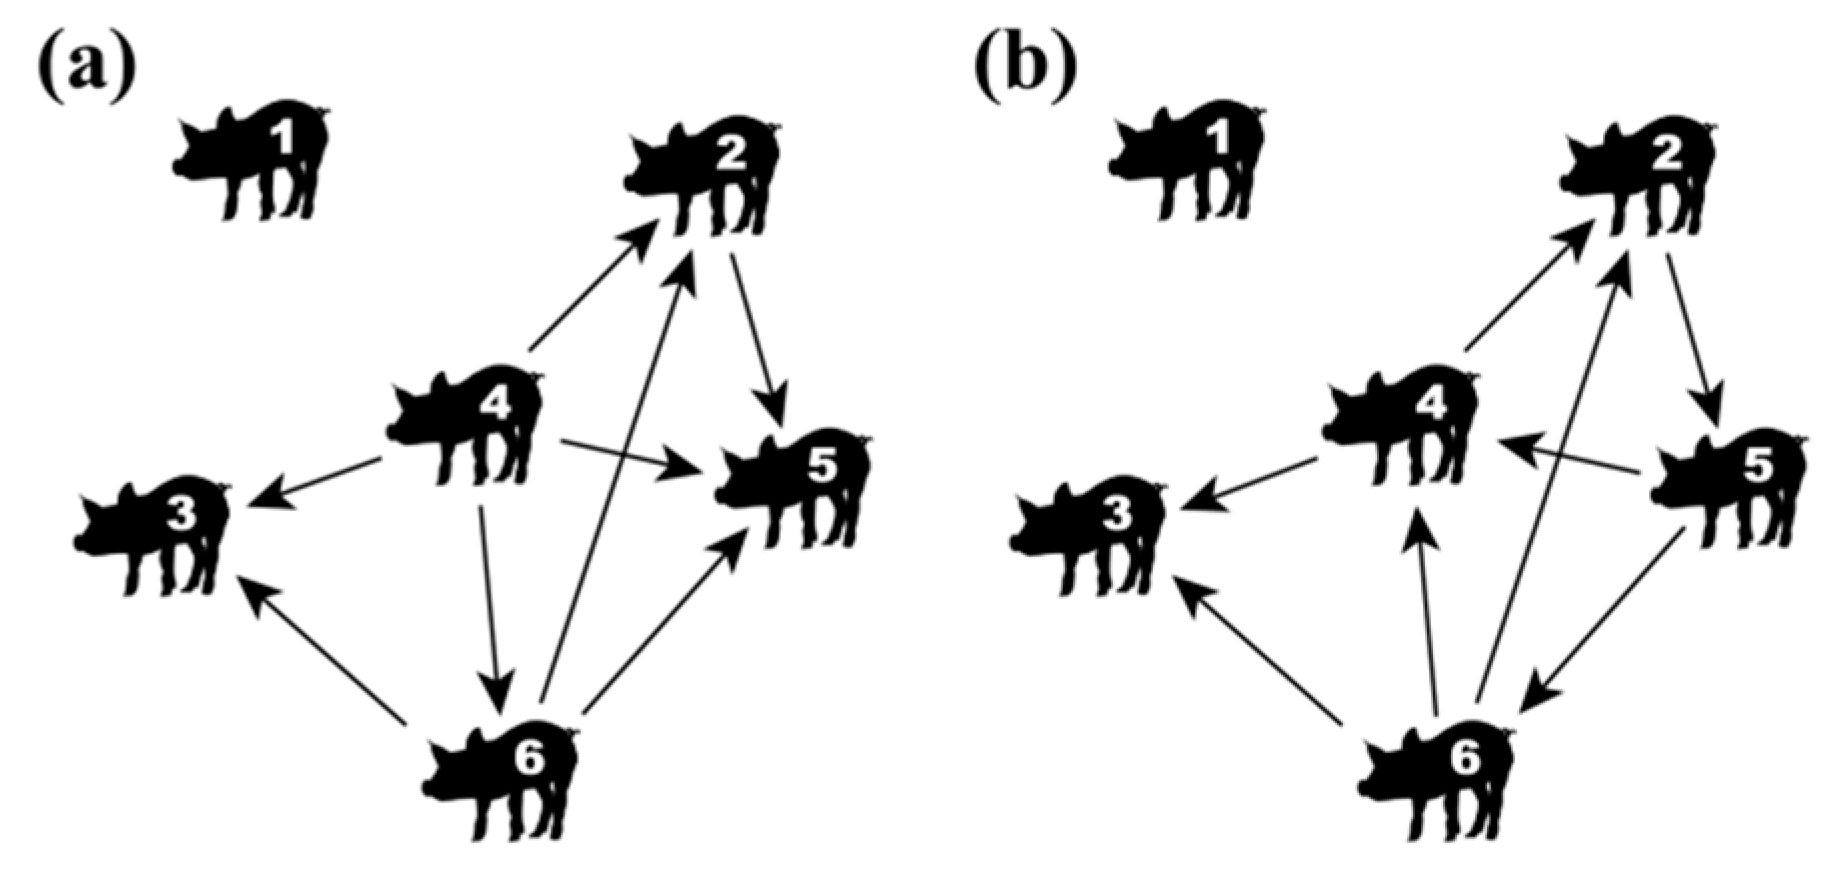 what is the function of the dominance hierarchy within a group of animals